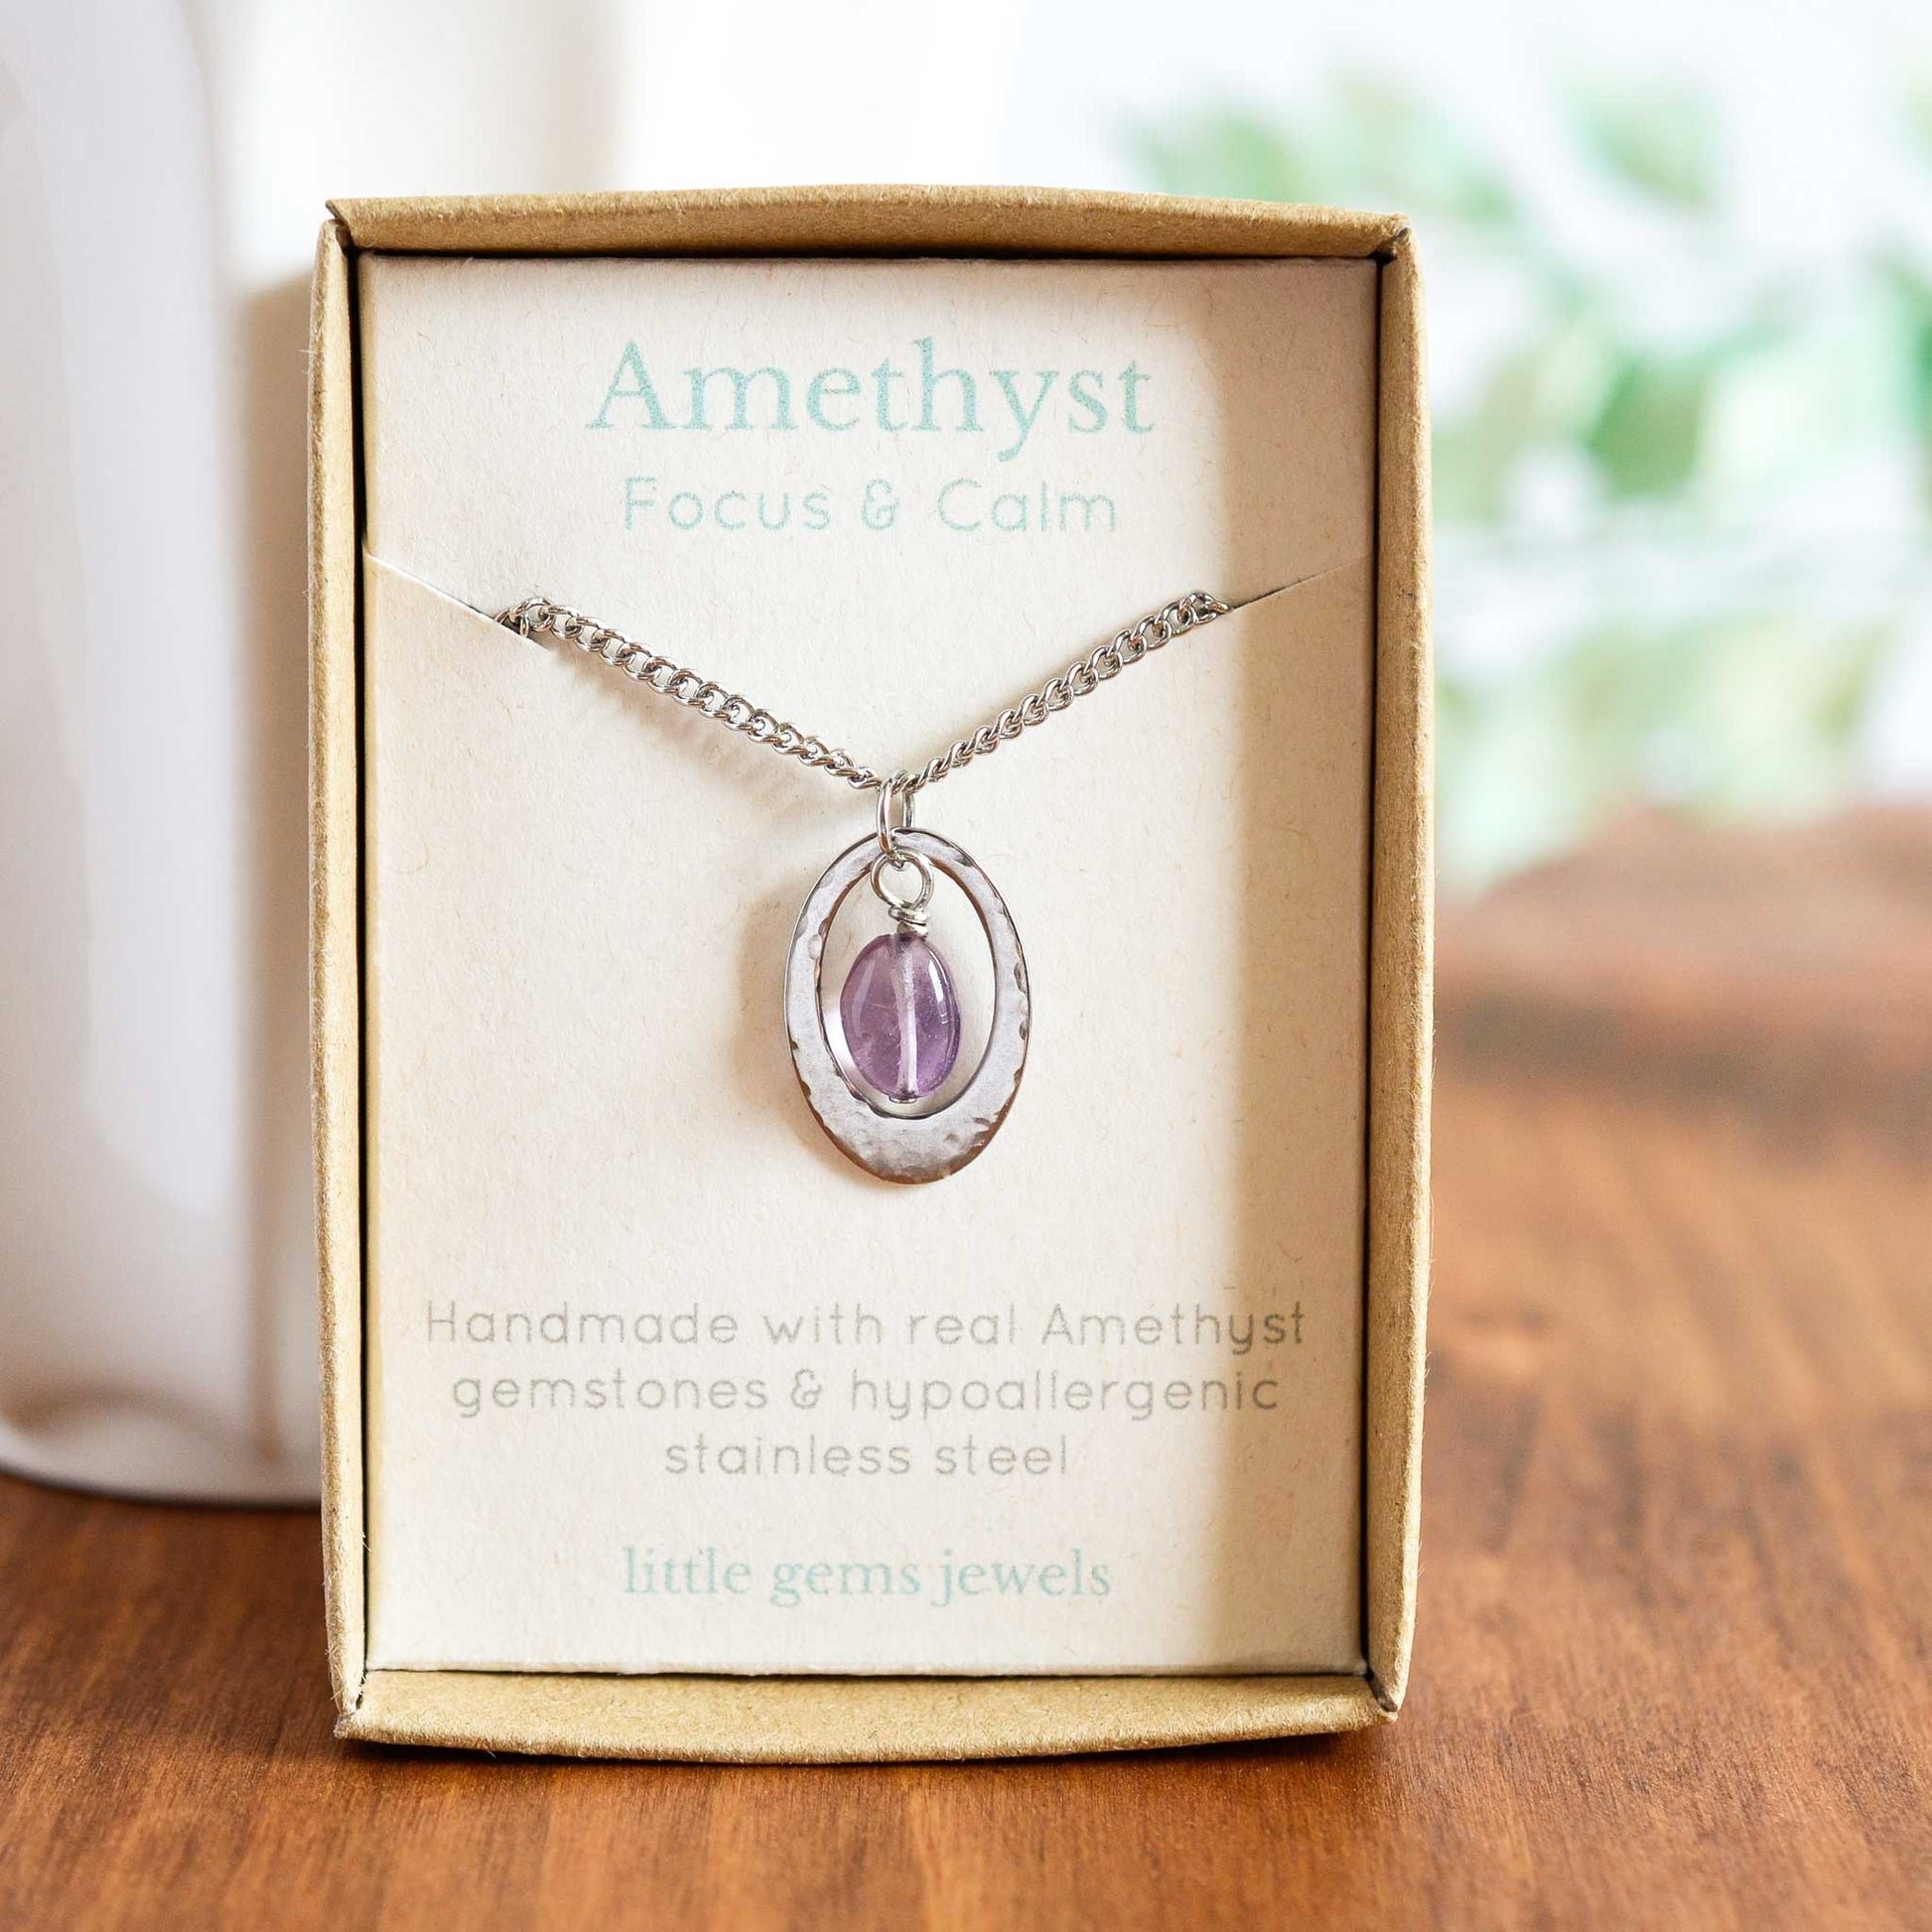 Oval pendant with Amethyst gemstone in gift box